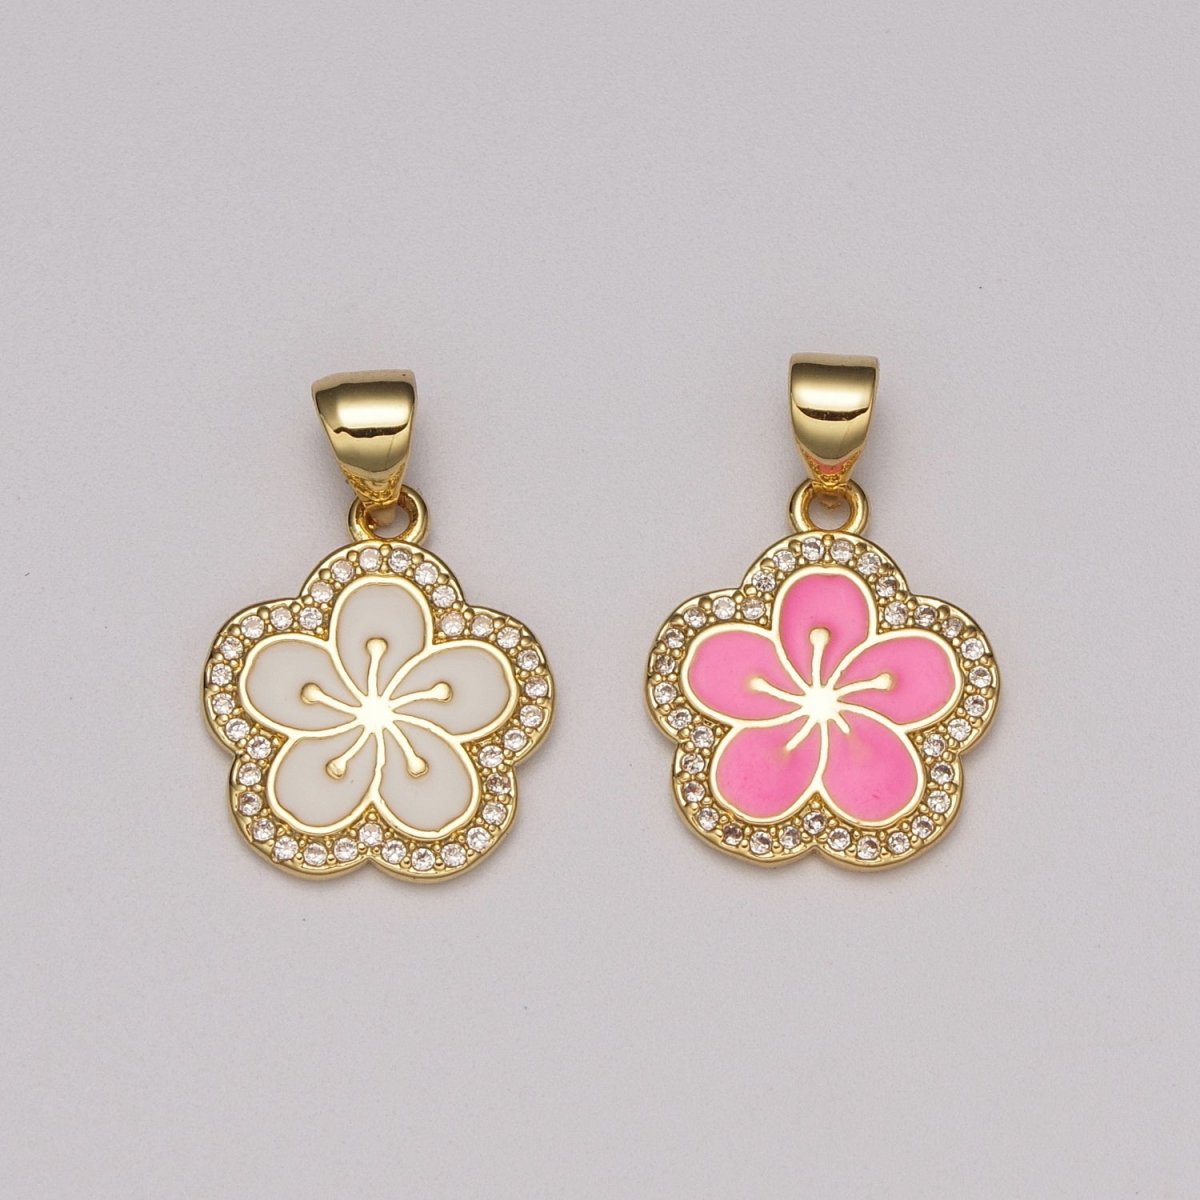 OS White Pink Hibiscus Charms, 21*14mm, Flower Charm Necklace Pendant Bracelet Charm, Jewelry Supplies, Enamel Charm Hawaiian Inspired N-1416 N-1417 - DLUXCA